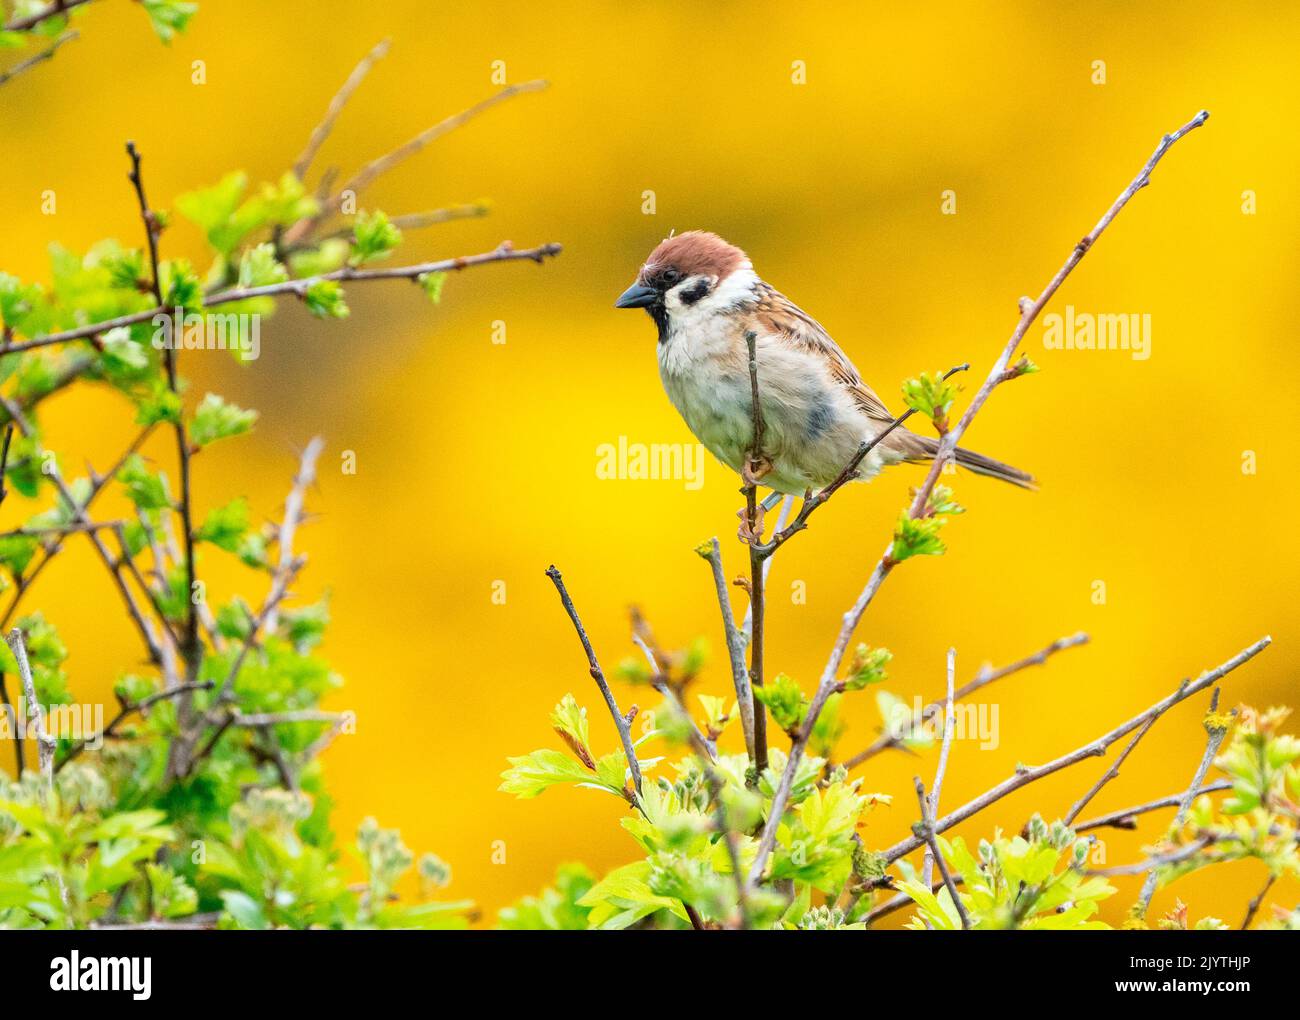 Tree sparrow (Passer montanus) perched on a branch, England Stock Photo